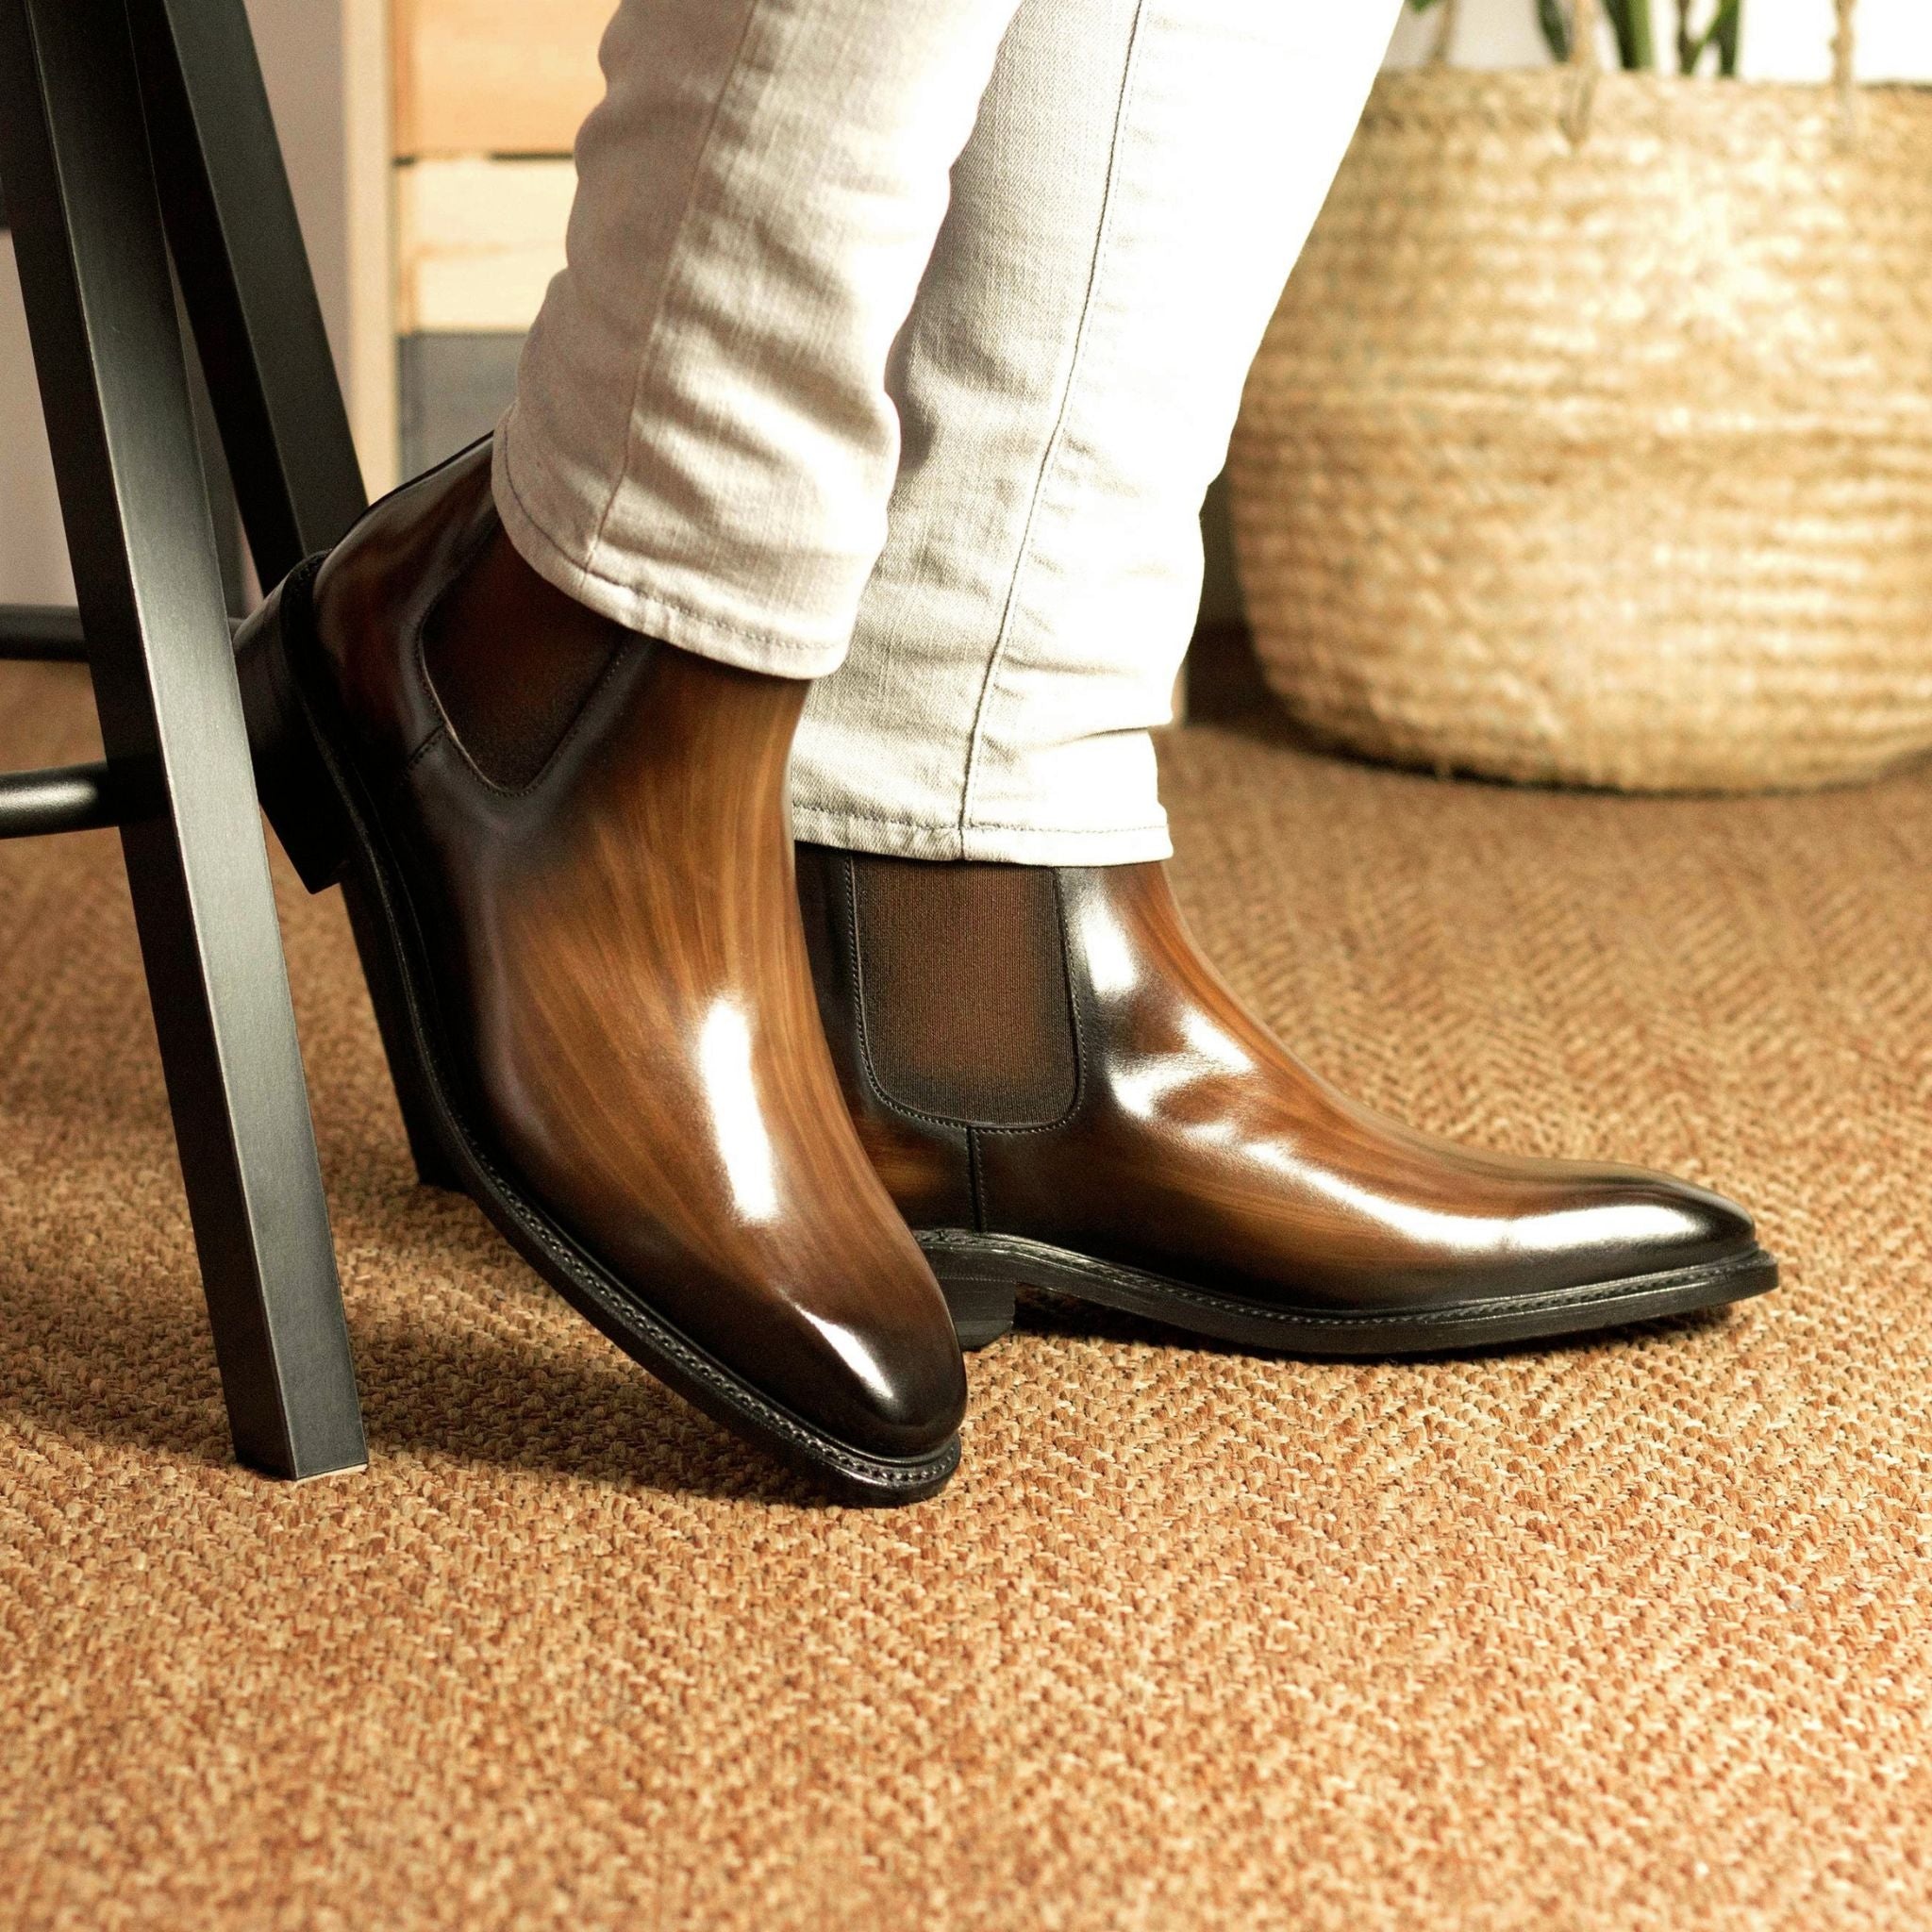 High-Heeled Oxford Shoes - Merkmak Shoes | Oxford shoes heels, Oxford shoes,  Mens fashion rugged